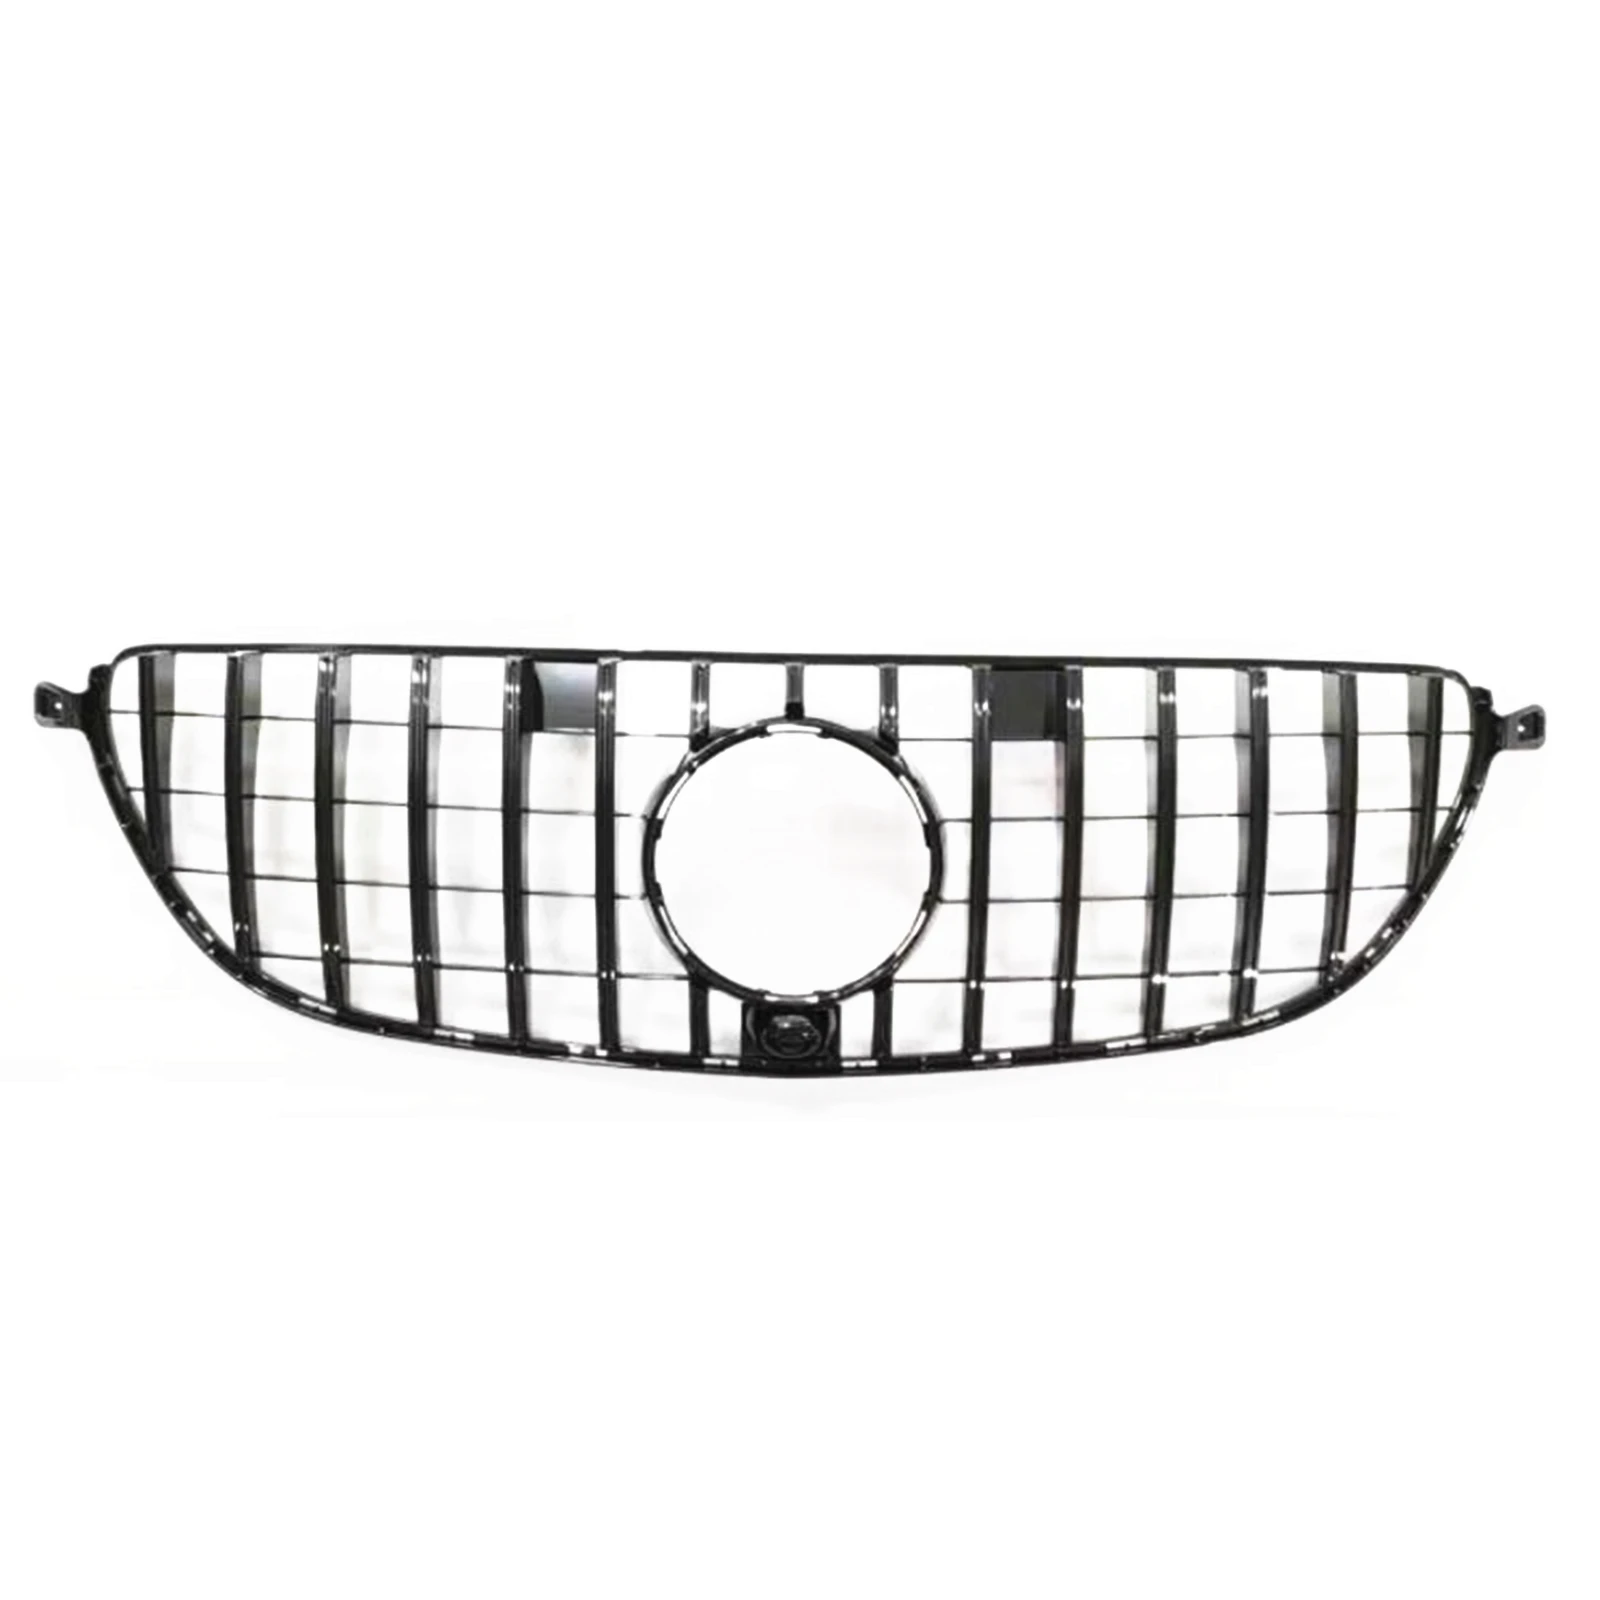 Glossy Black Car Front Grille Grill Bumper Hood Mesh Grid For Mercedes Benz W166 GLE 63 AMG 2015 2016 2017 2018